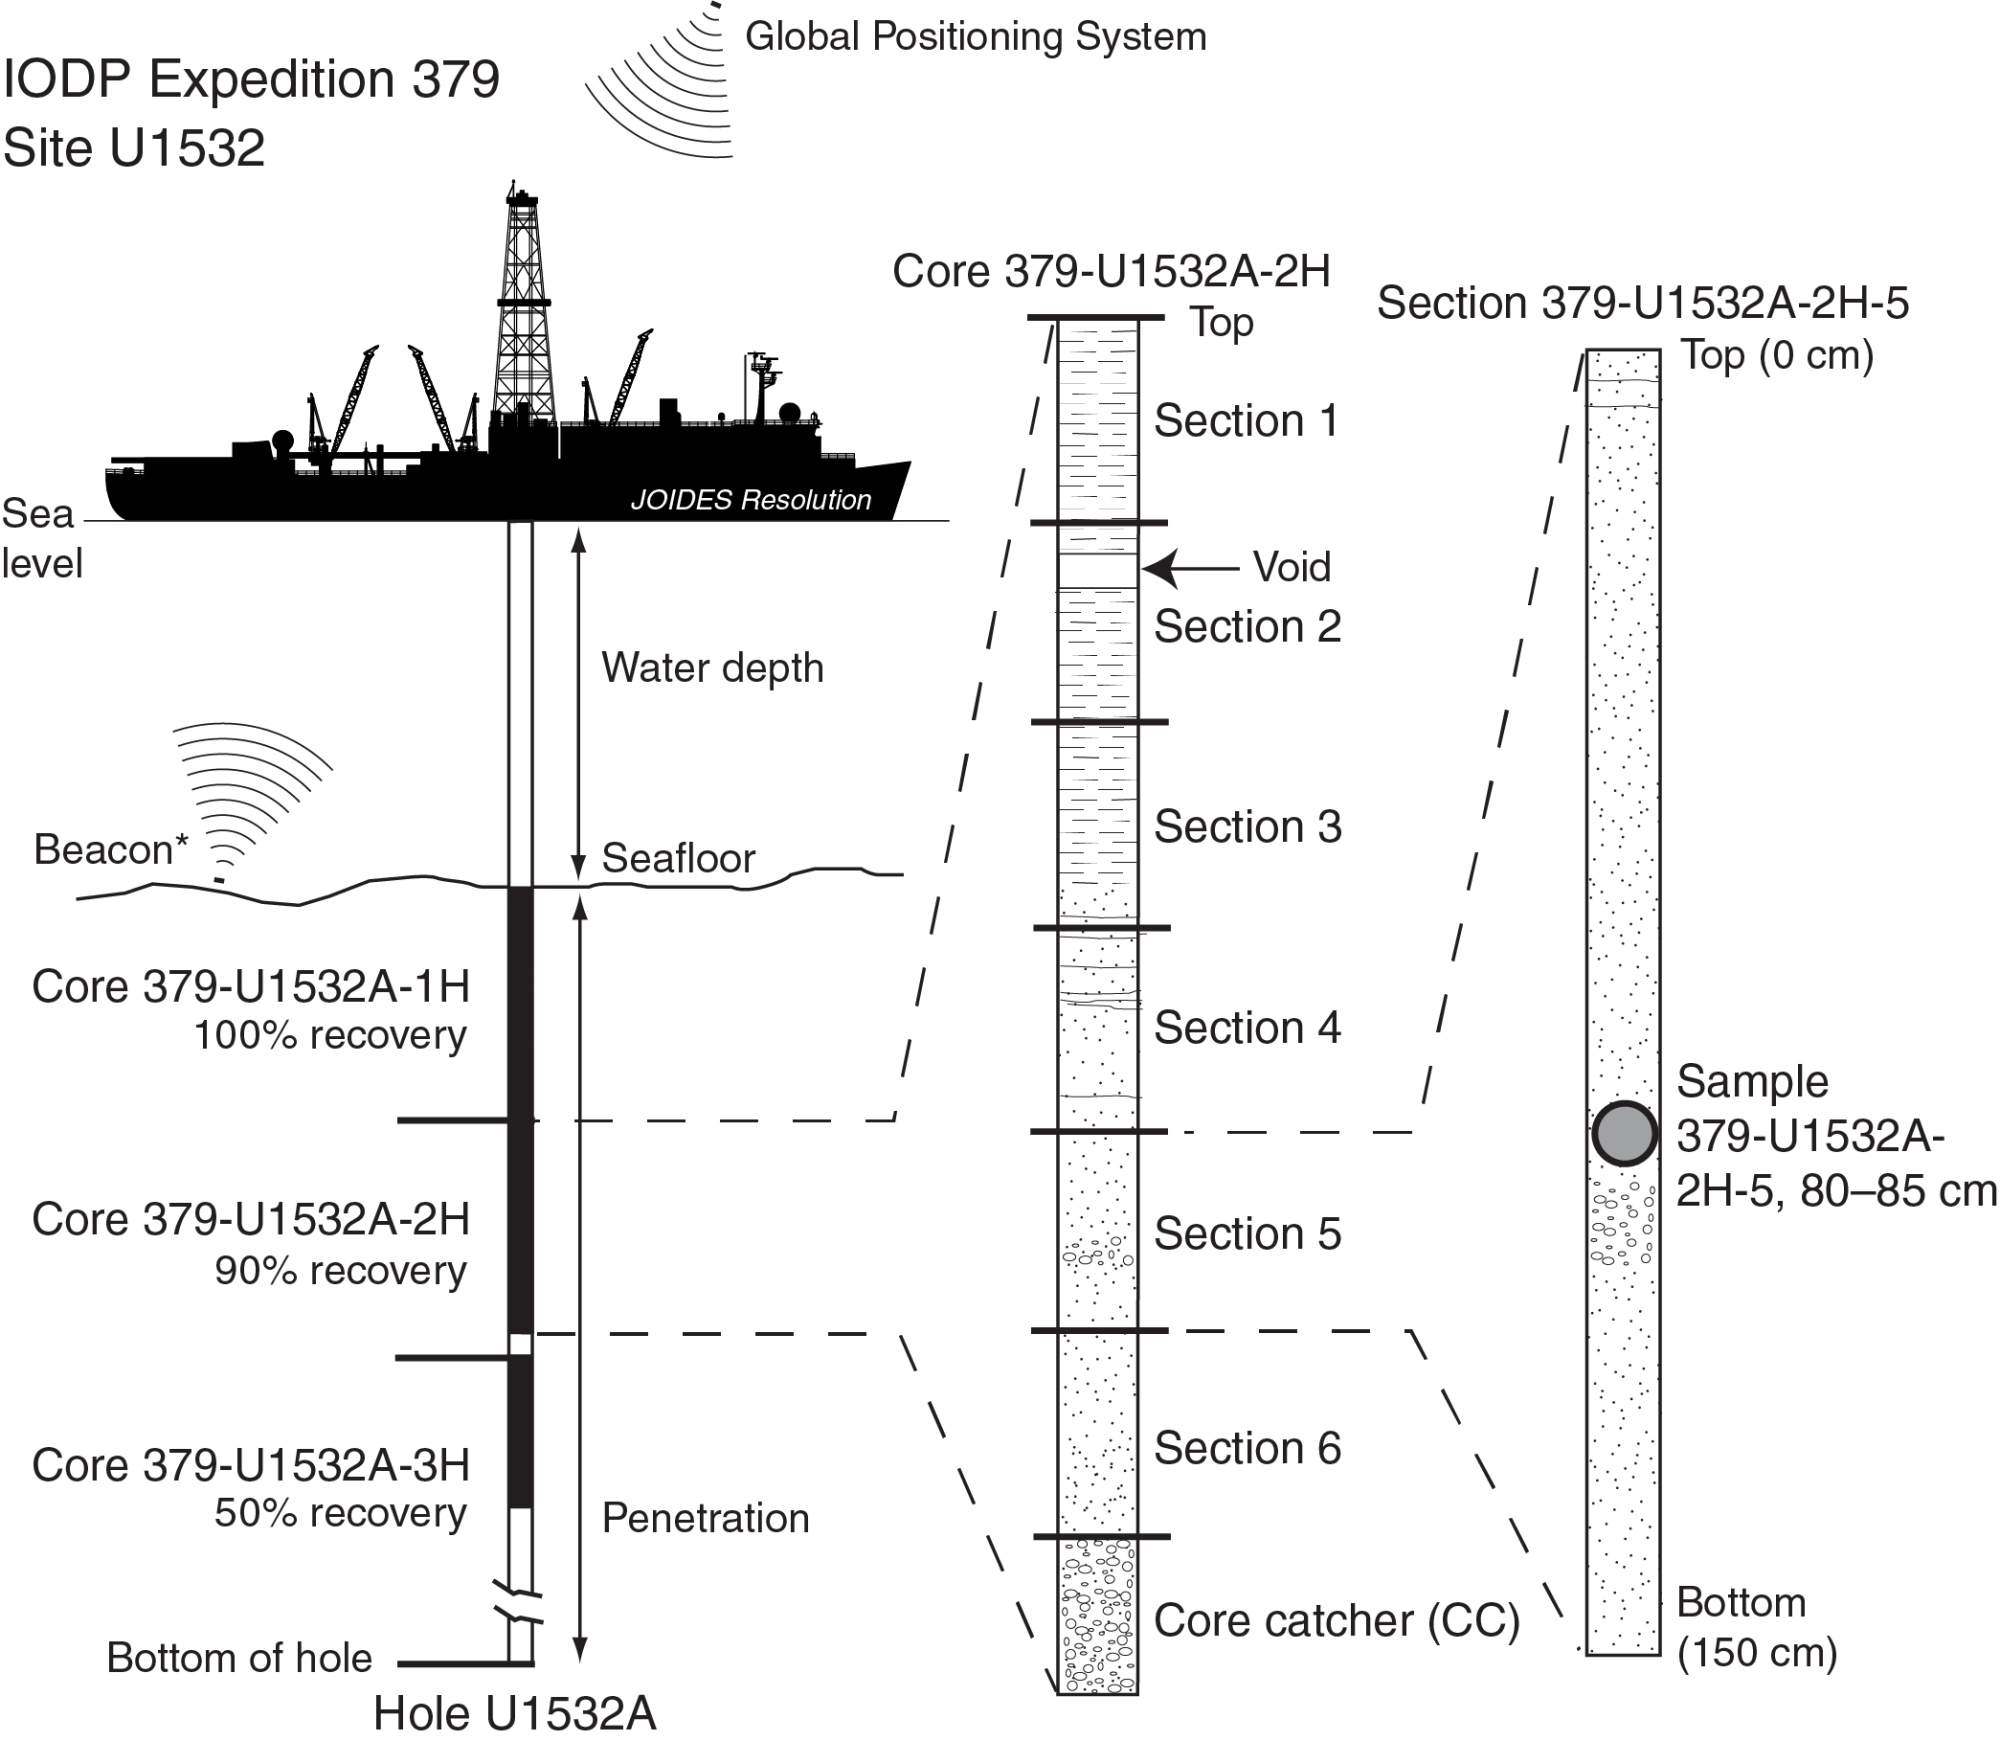 Illustration: JOIDES Resolution deep sea drilling vessel and its naming conventions for core samples.